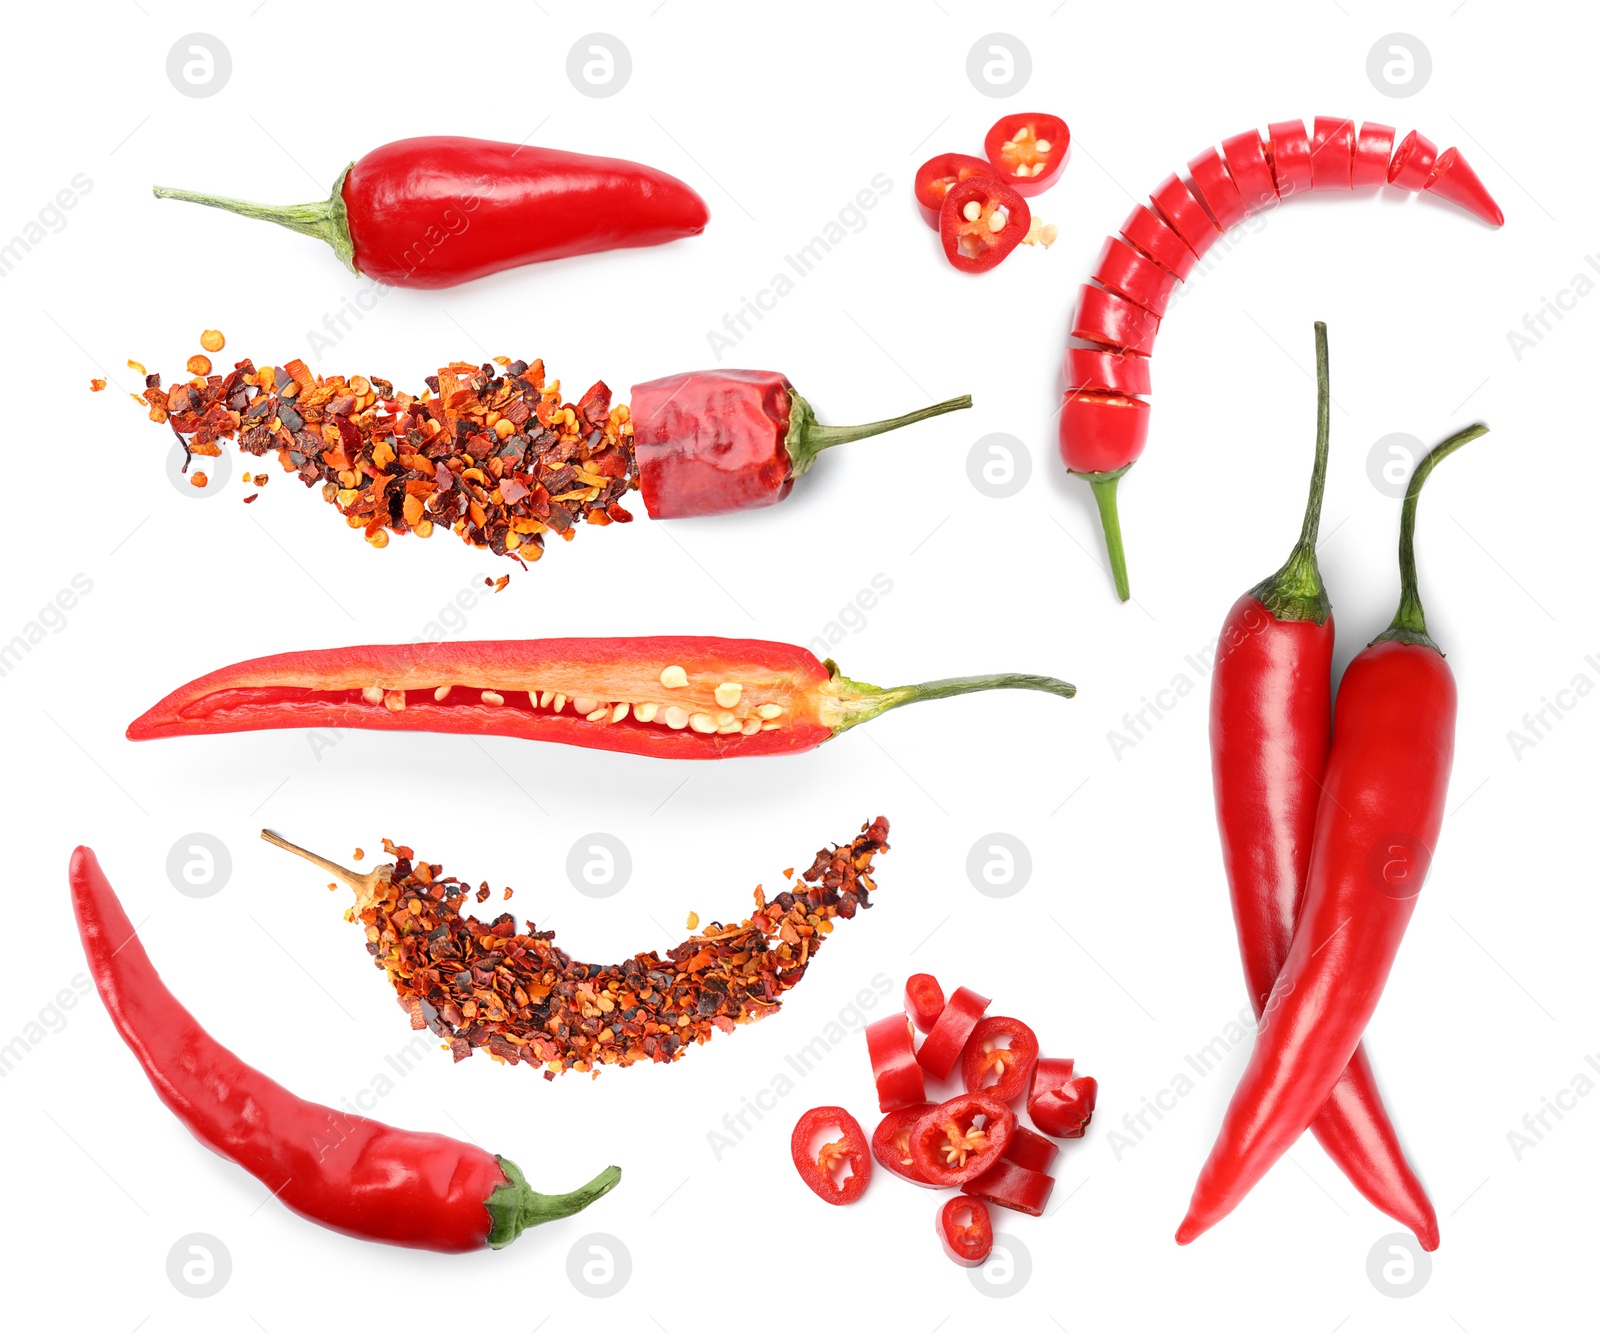 Image of Set with red hot chili peppers and flakes on white background